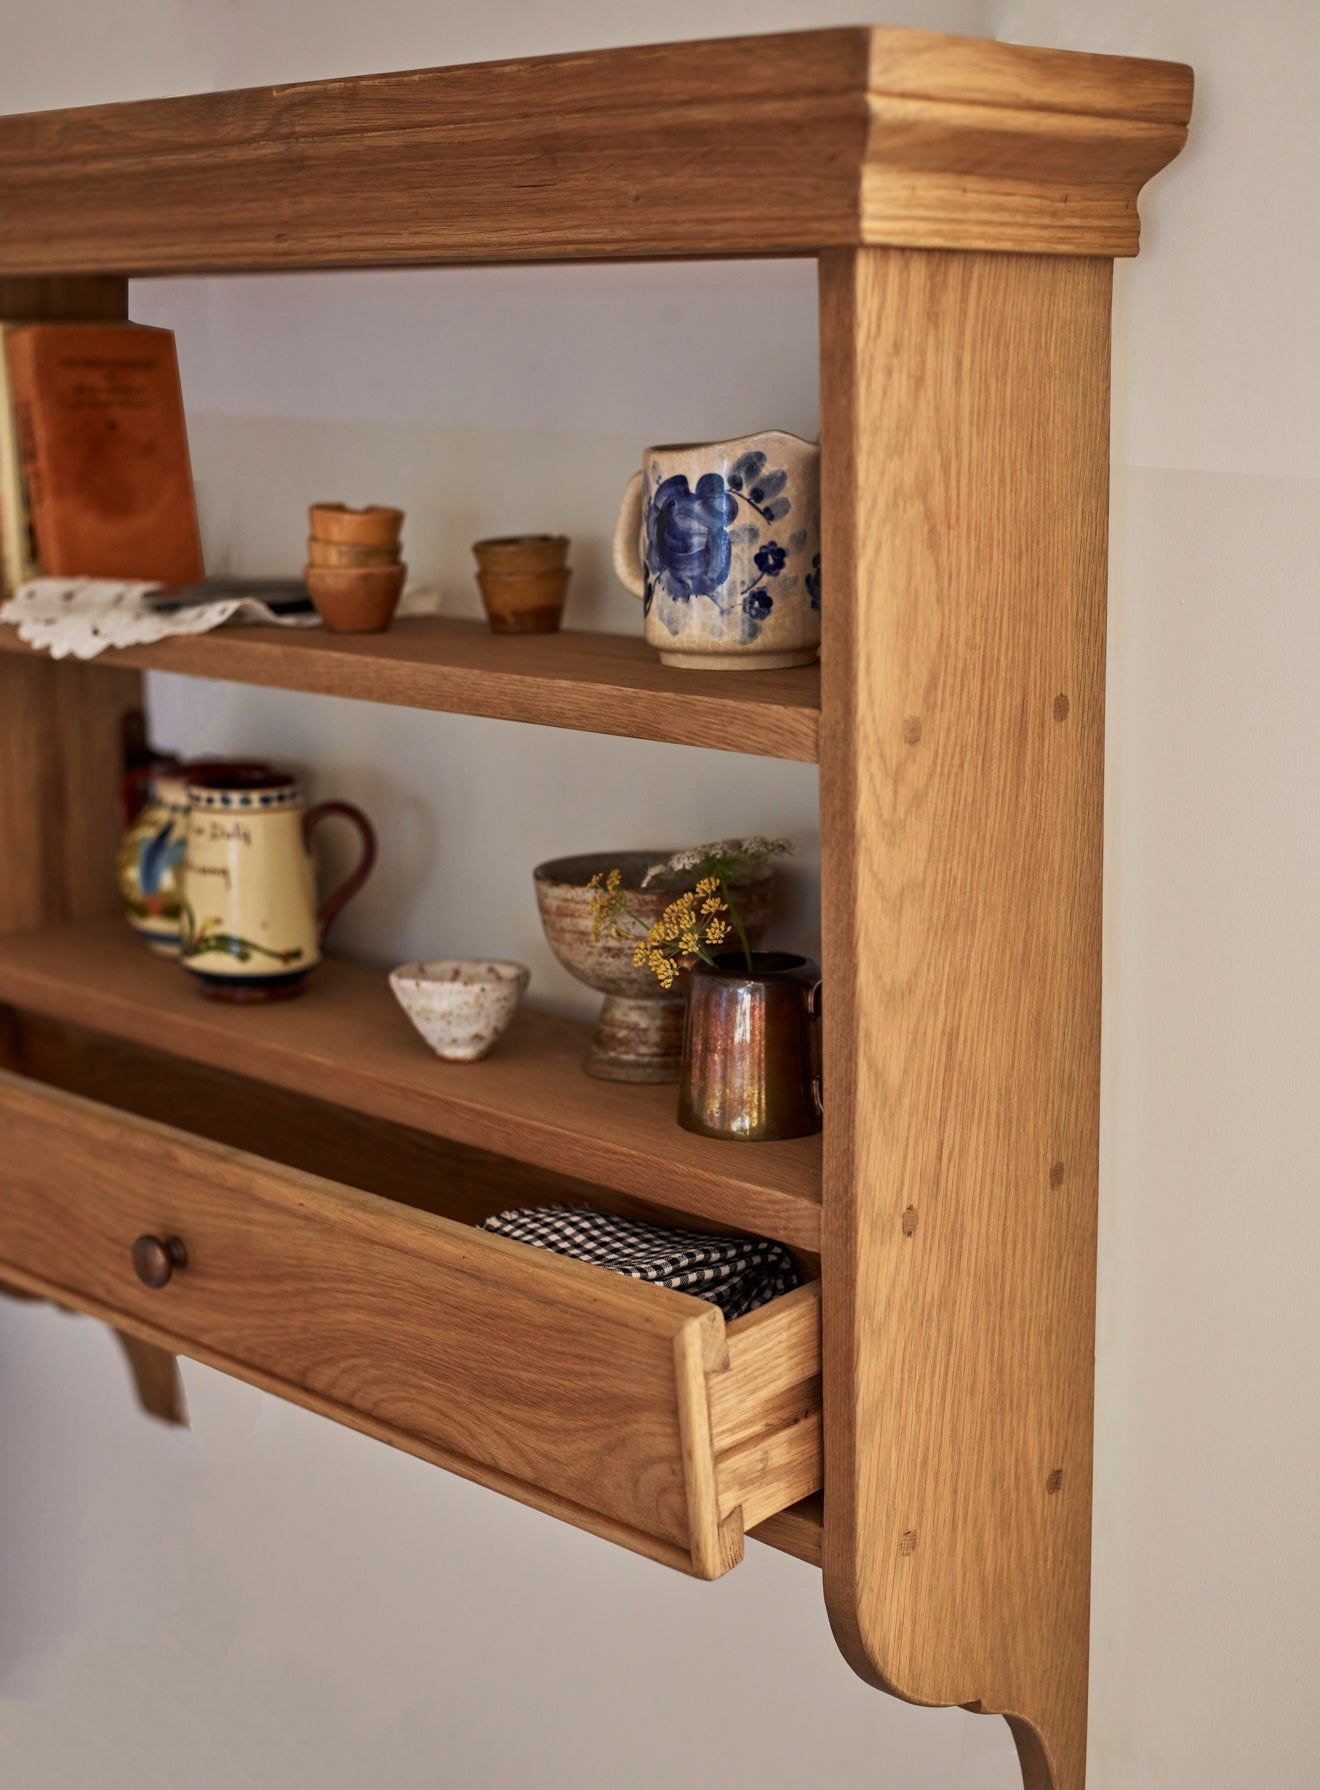 Wooden Shelves : Stylish Ways to Use Wooden Shelves in Your Home décor